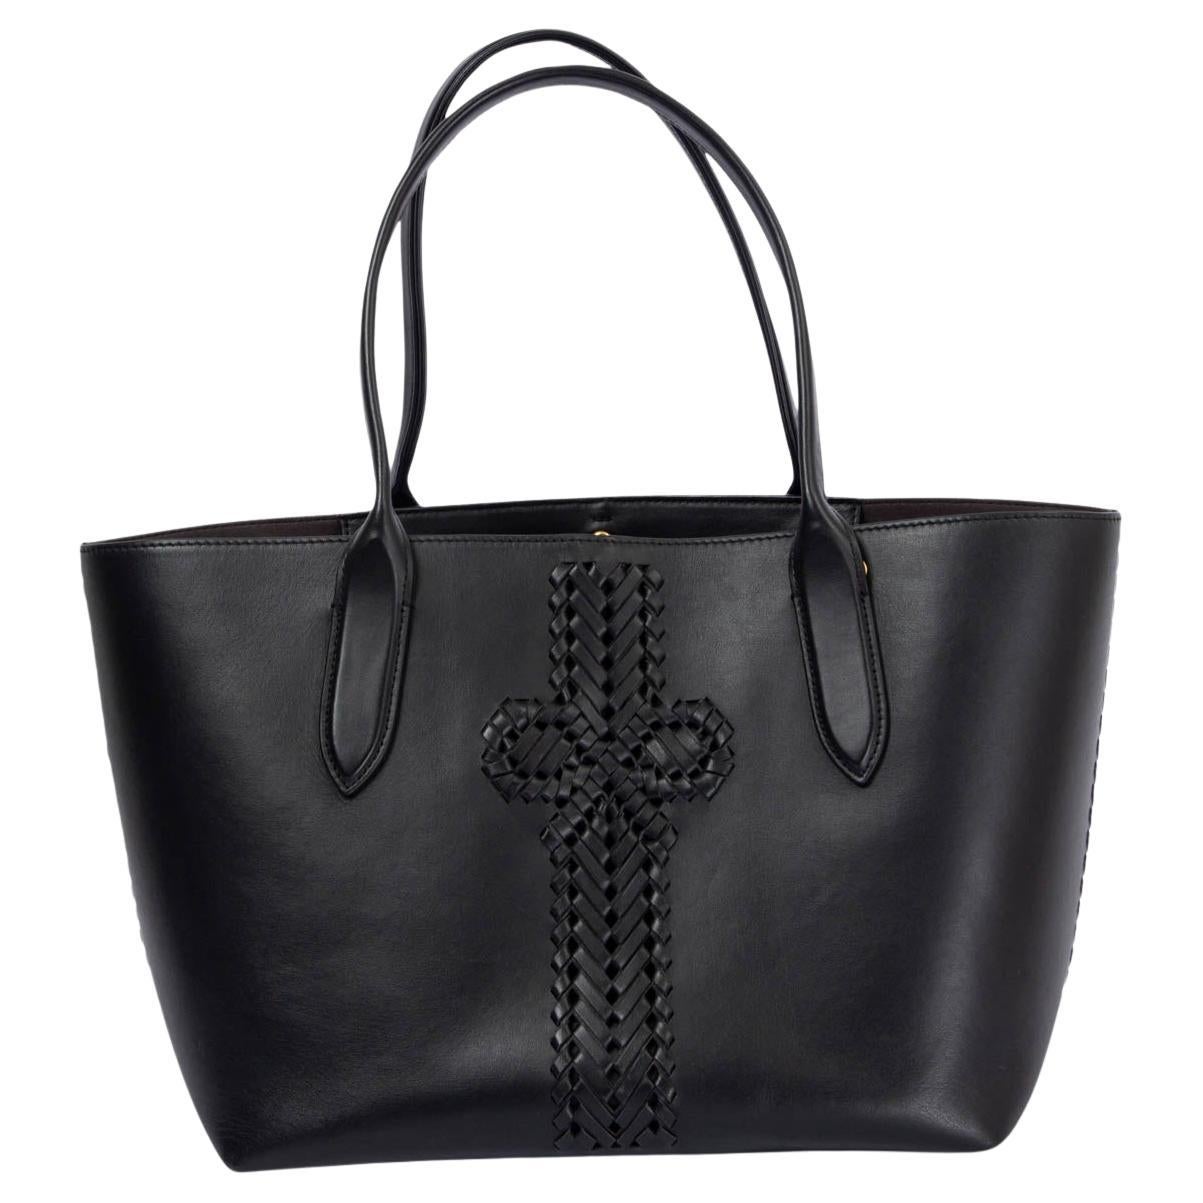 ANYA HINDMARCH black leather BOW DETAILED Shopping Tote Bag